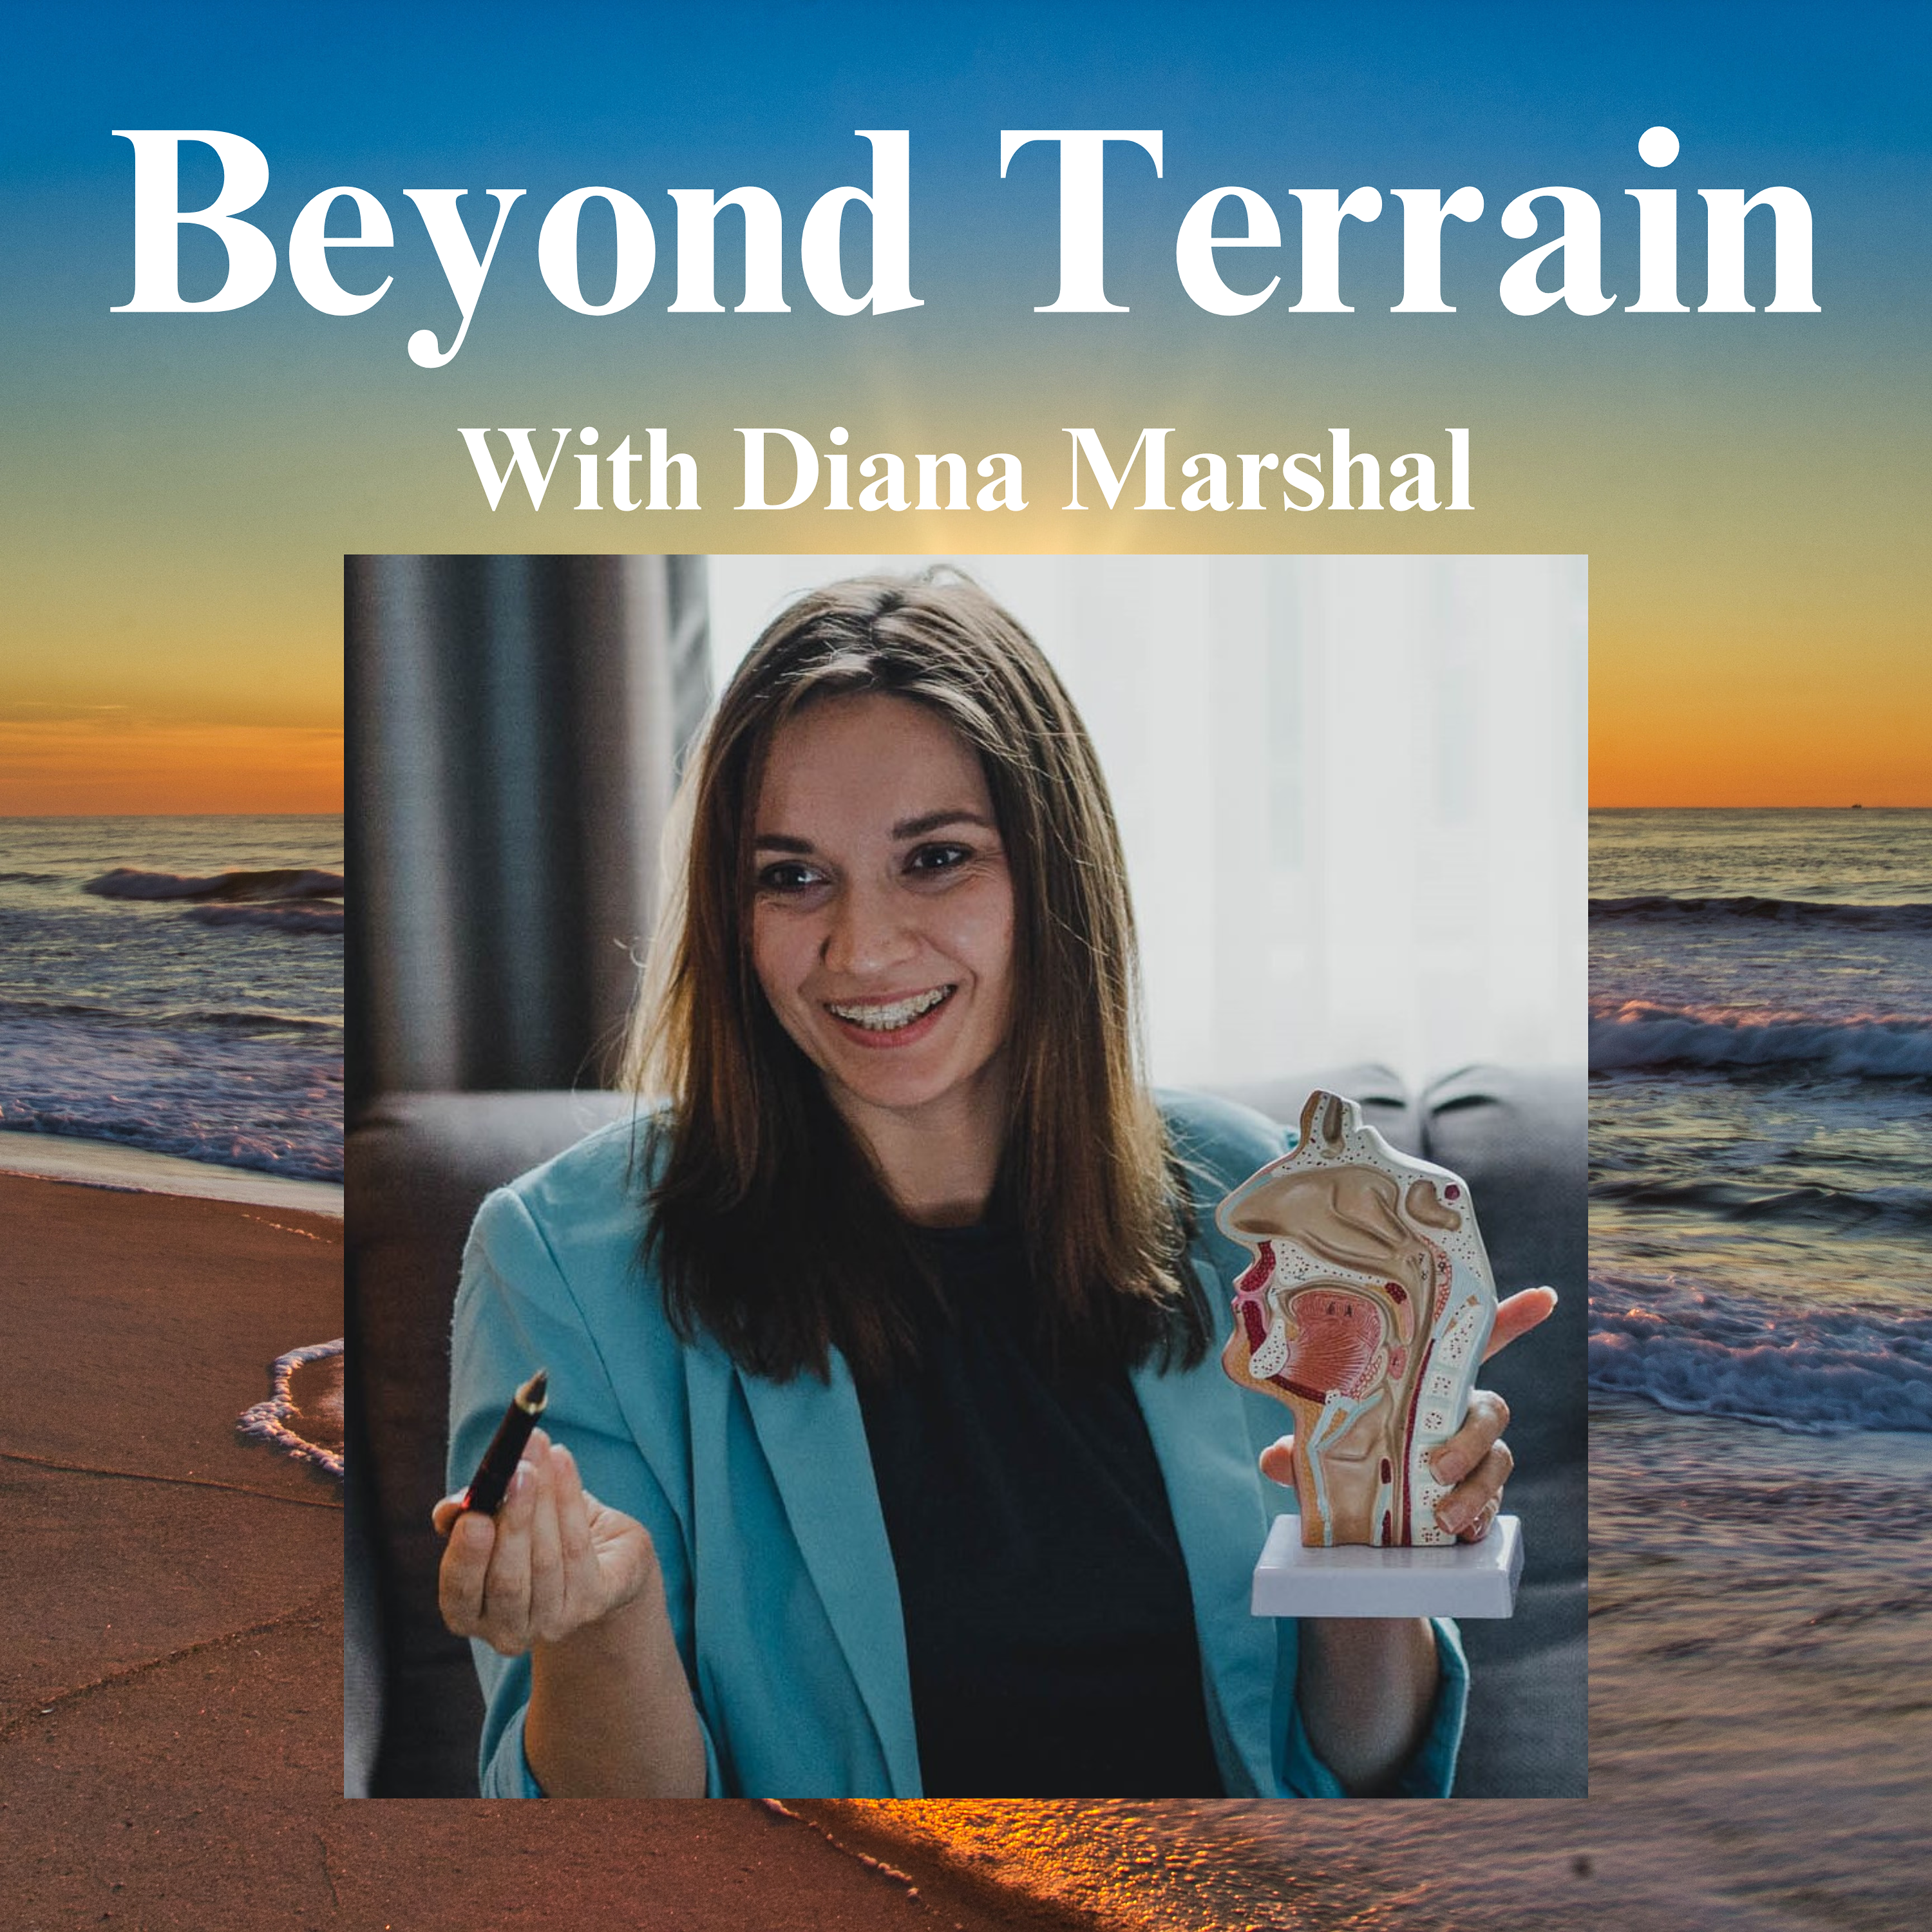 Diana Marshal on Breathing Patterns, Tongue ties, Myofunctional therapy, Proper Development, and so much more!